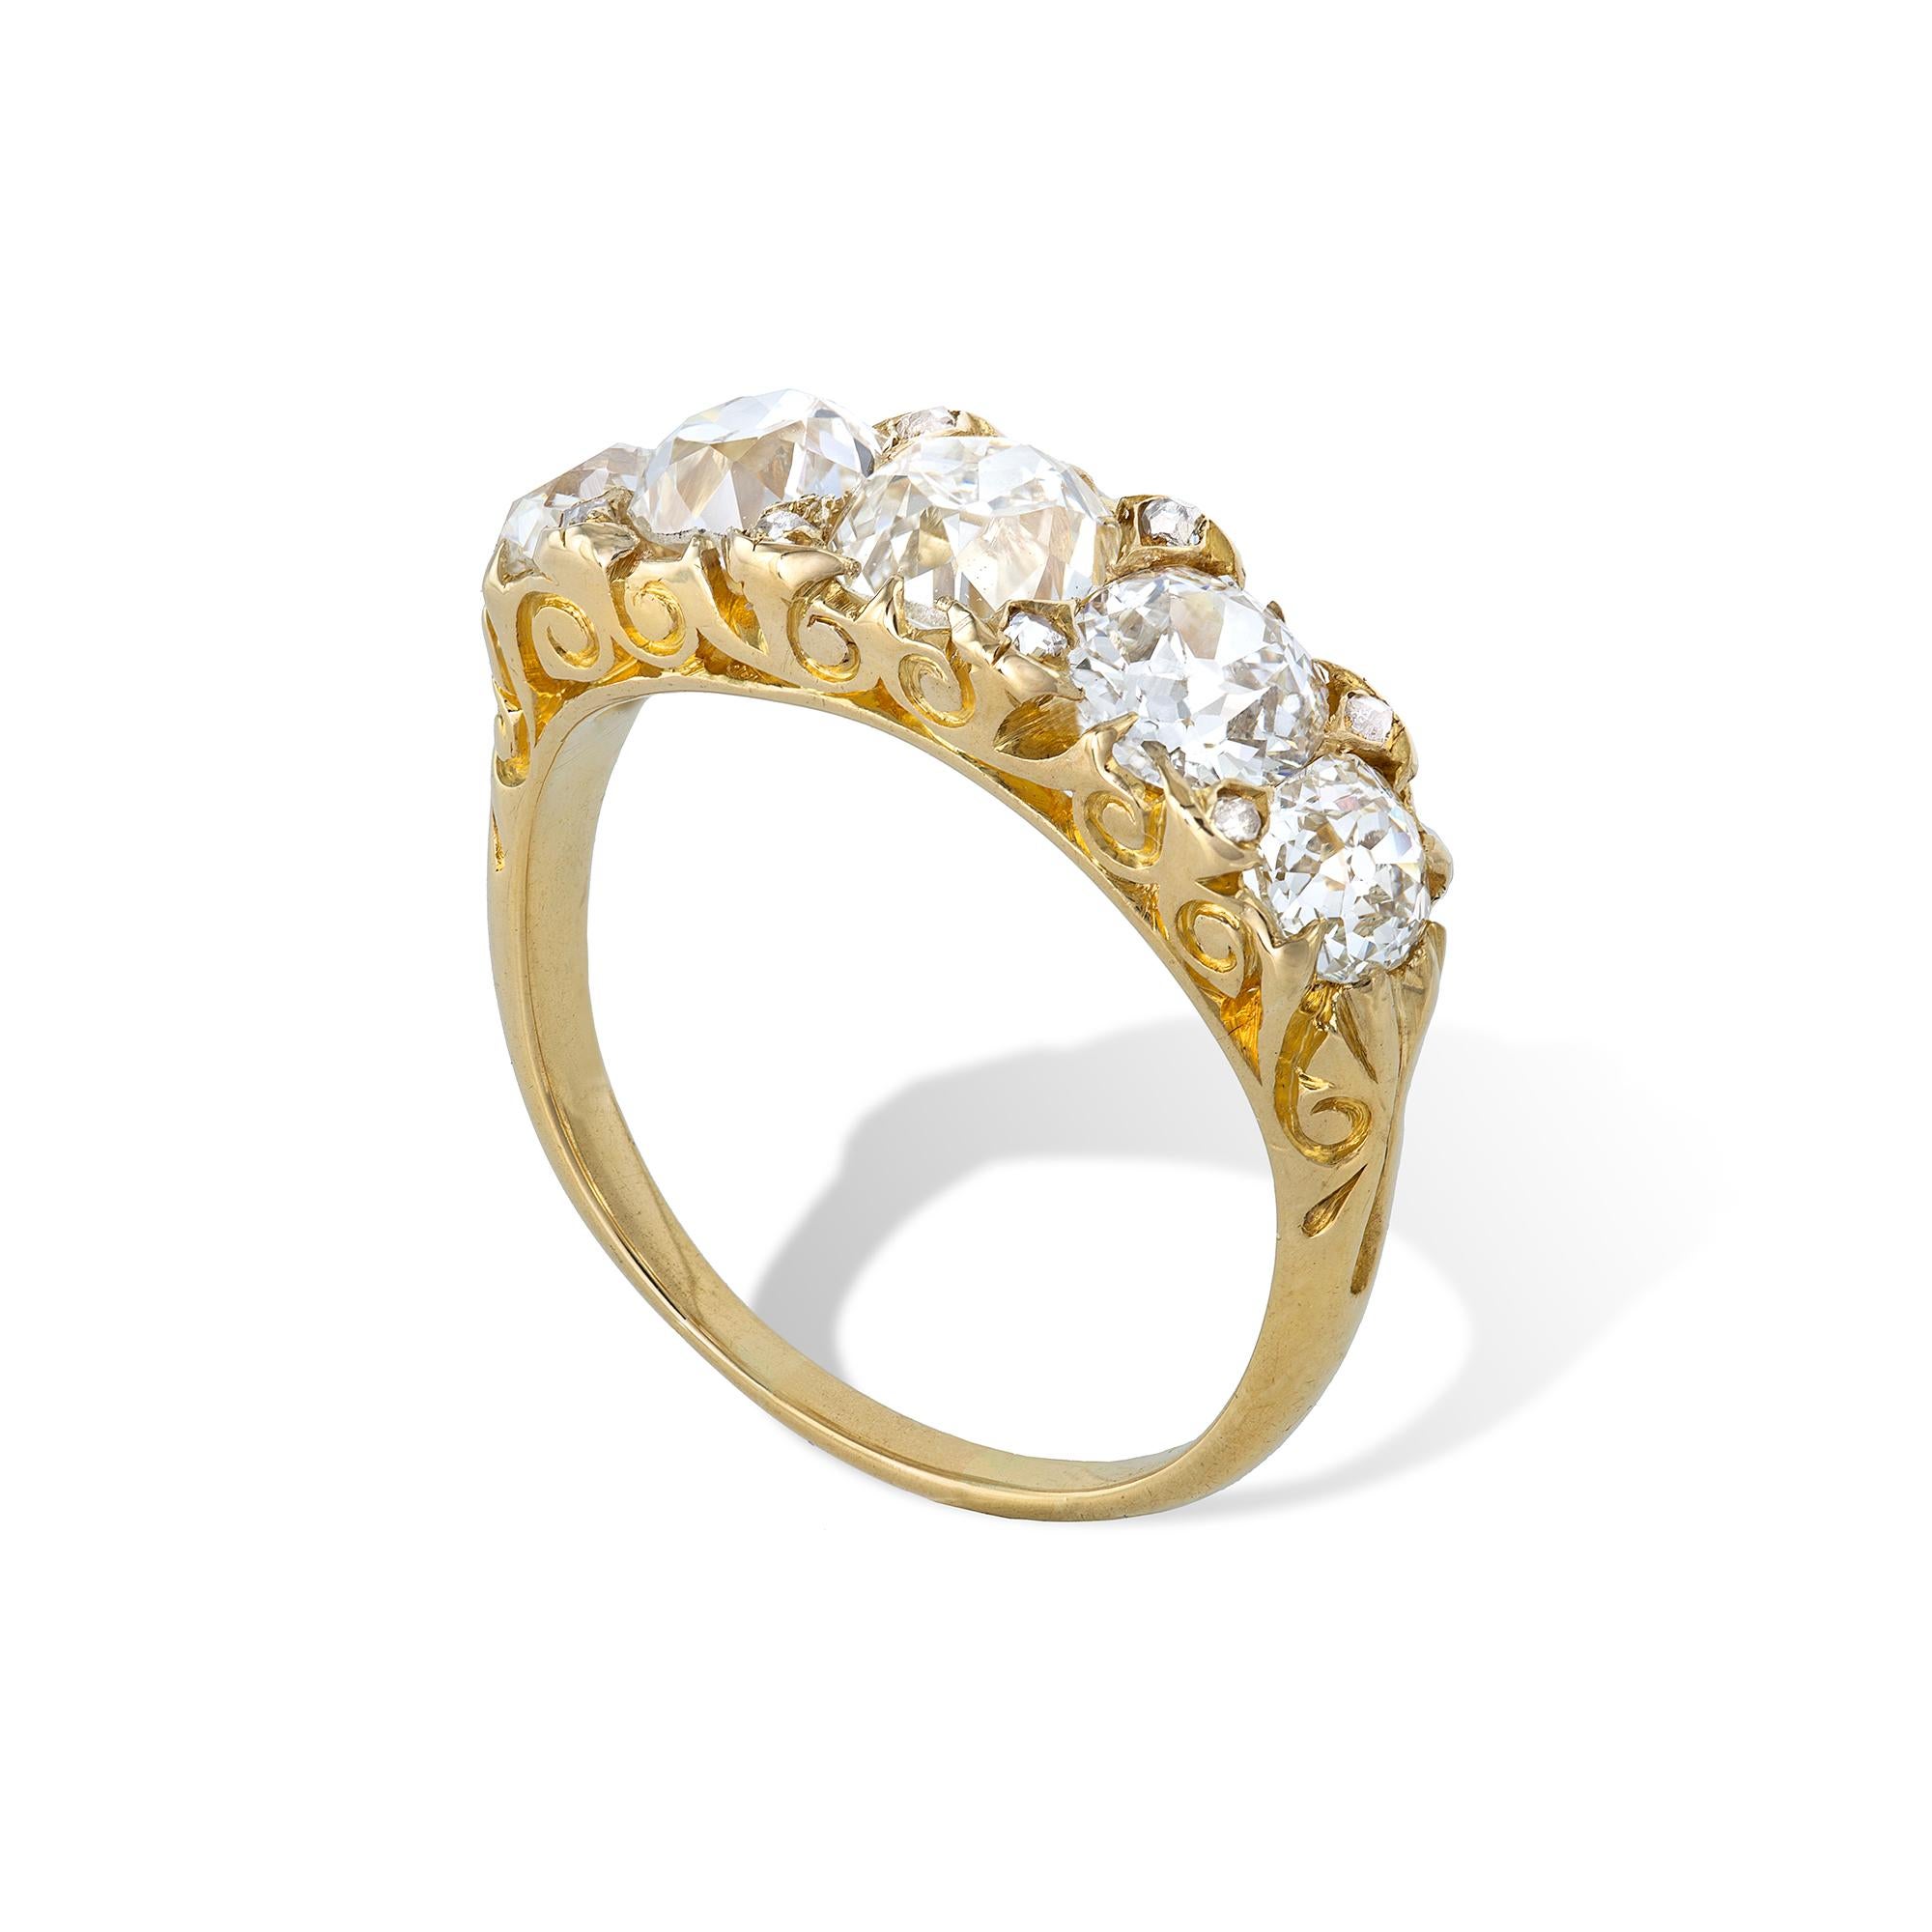 A Victorian five-stone diamond ring, the carved half hoop ring with five old brilliant-cut diamonds weighing approximately a total of 4.75 carats, with rose-cut diamonds set in-between, all claw-set to a yellow gold mount with scrolled shoulders,